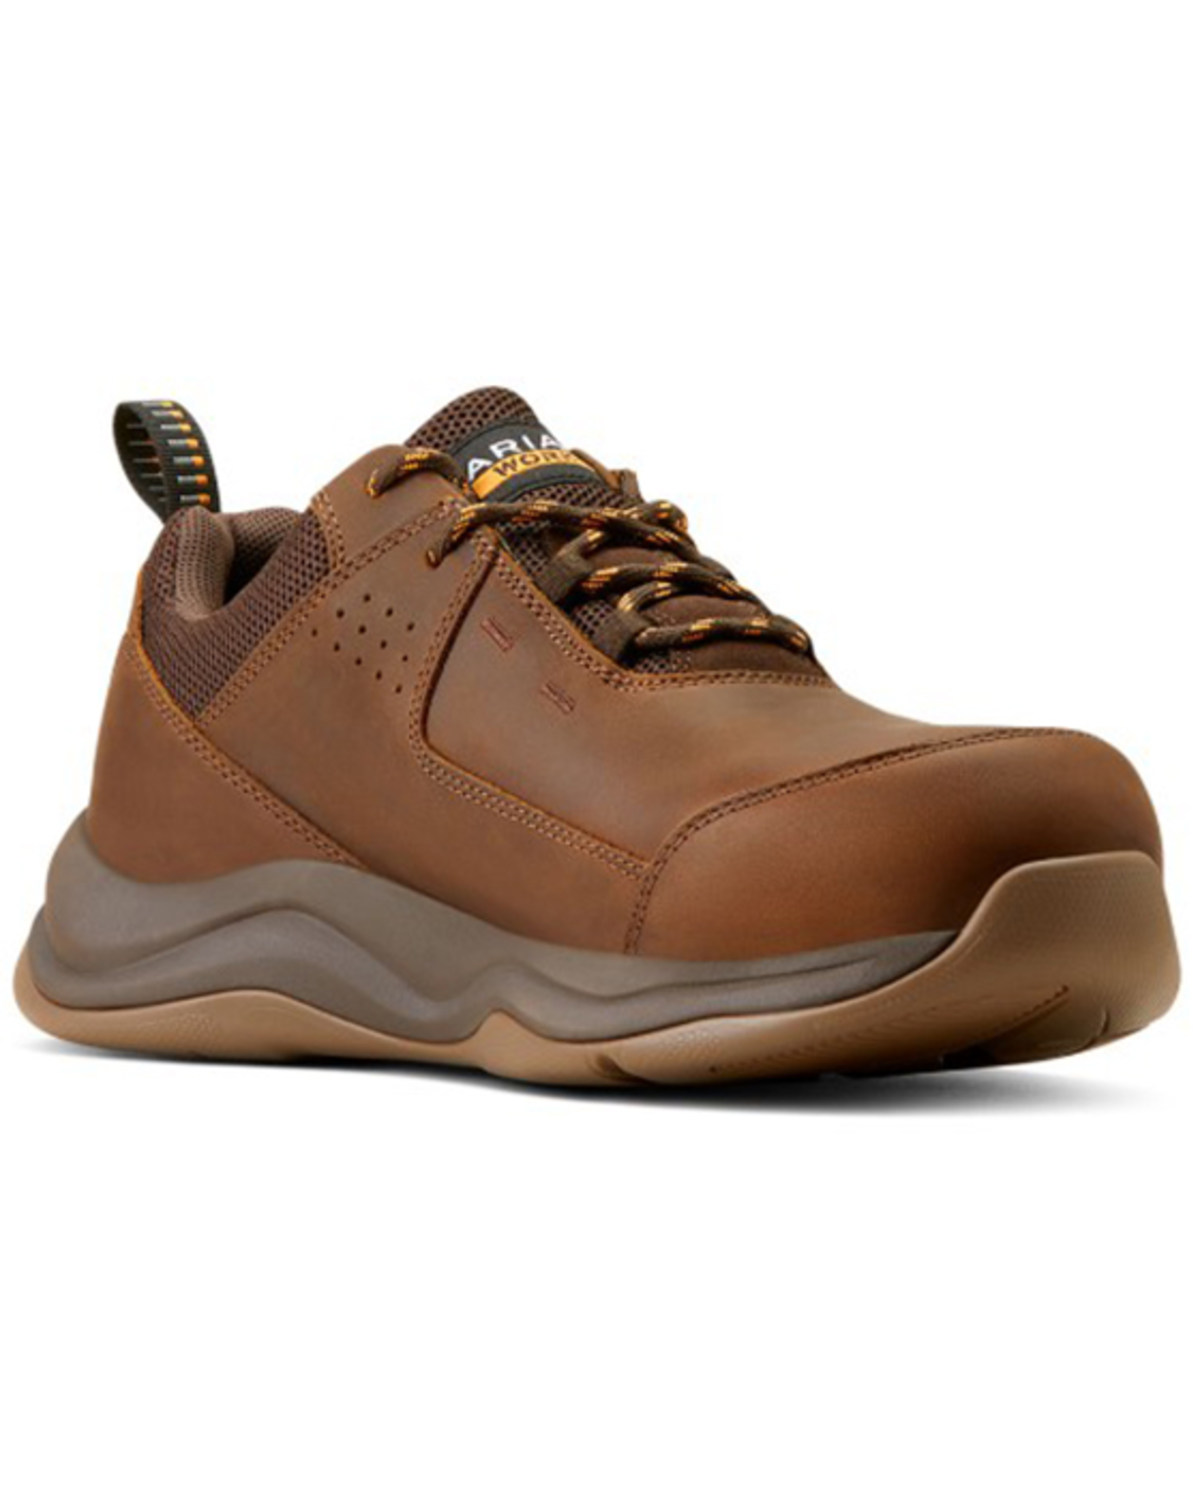 Ariat Men's Working Mile SD Work Shoes - Composite Toe